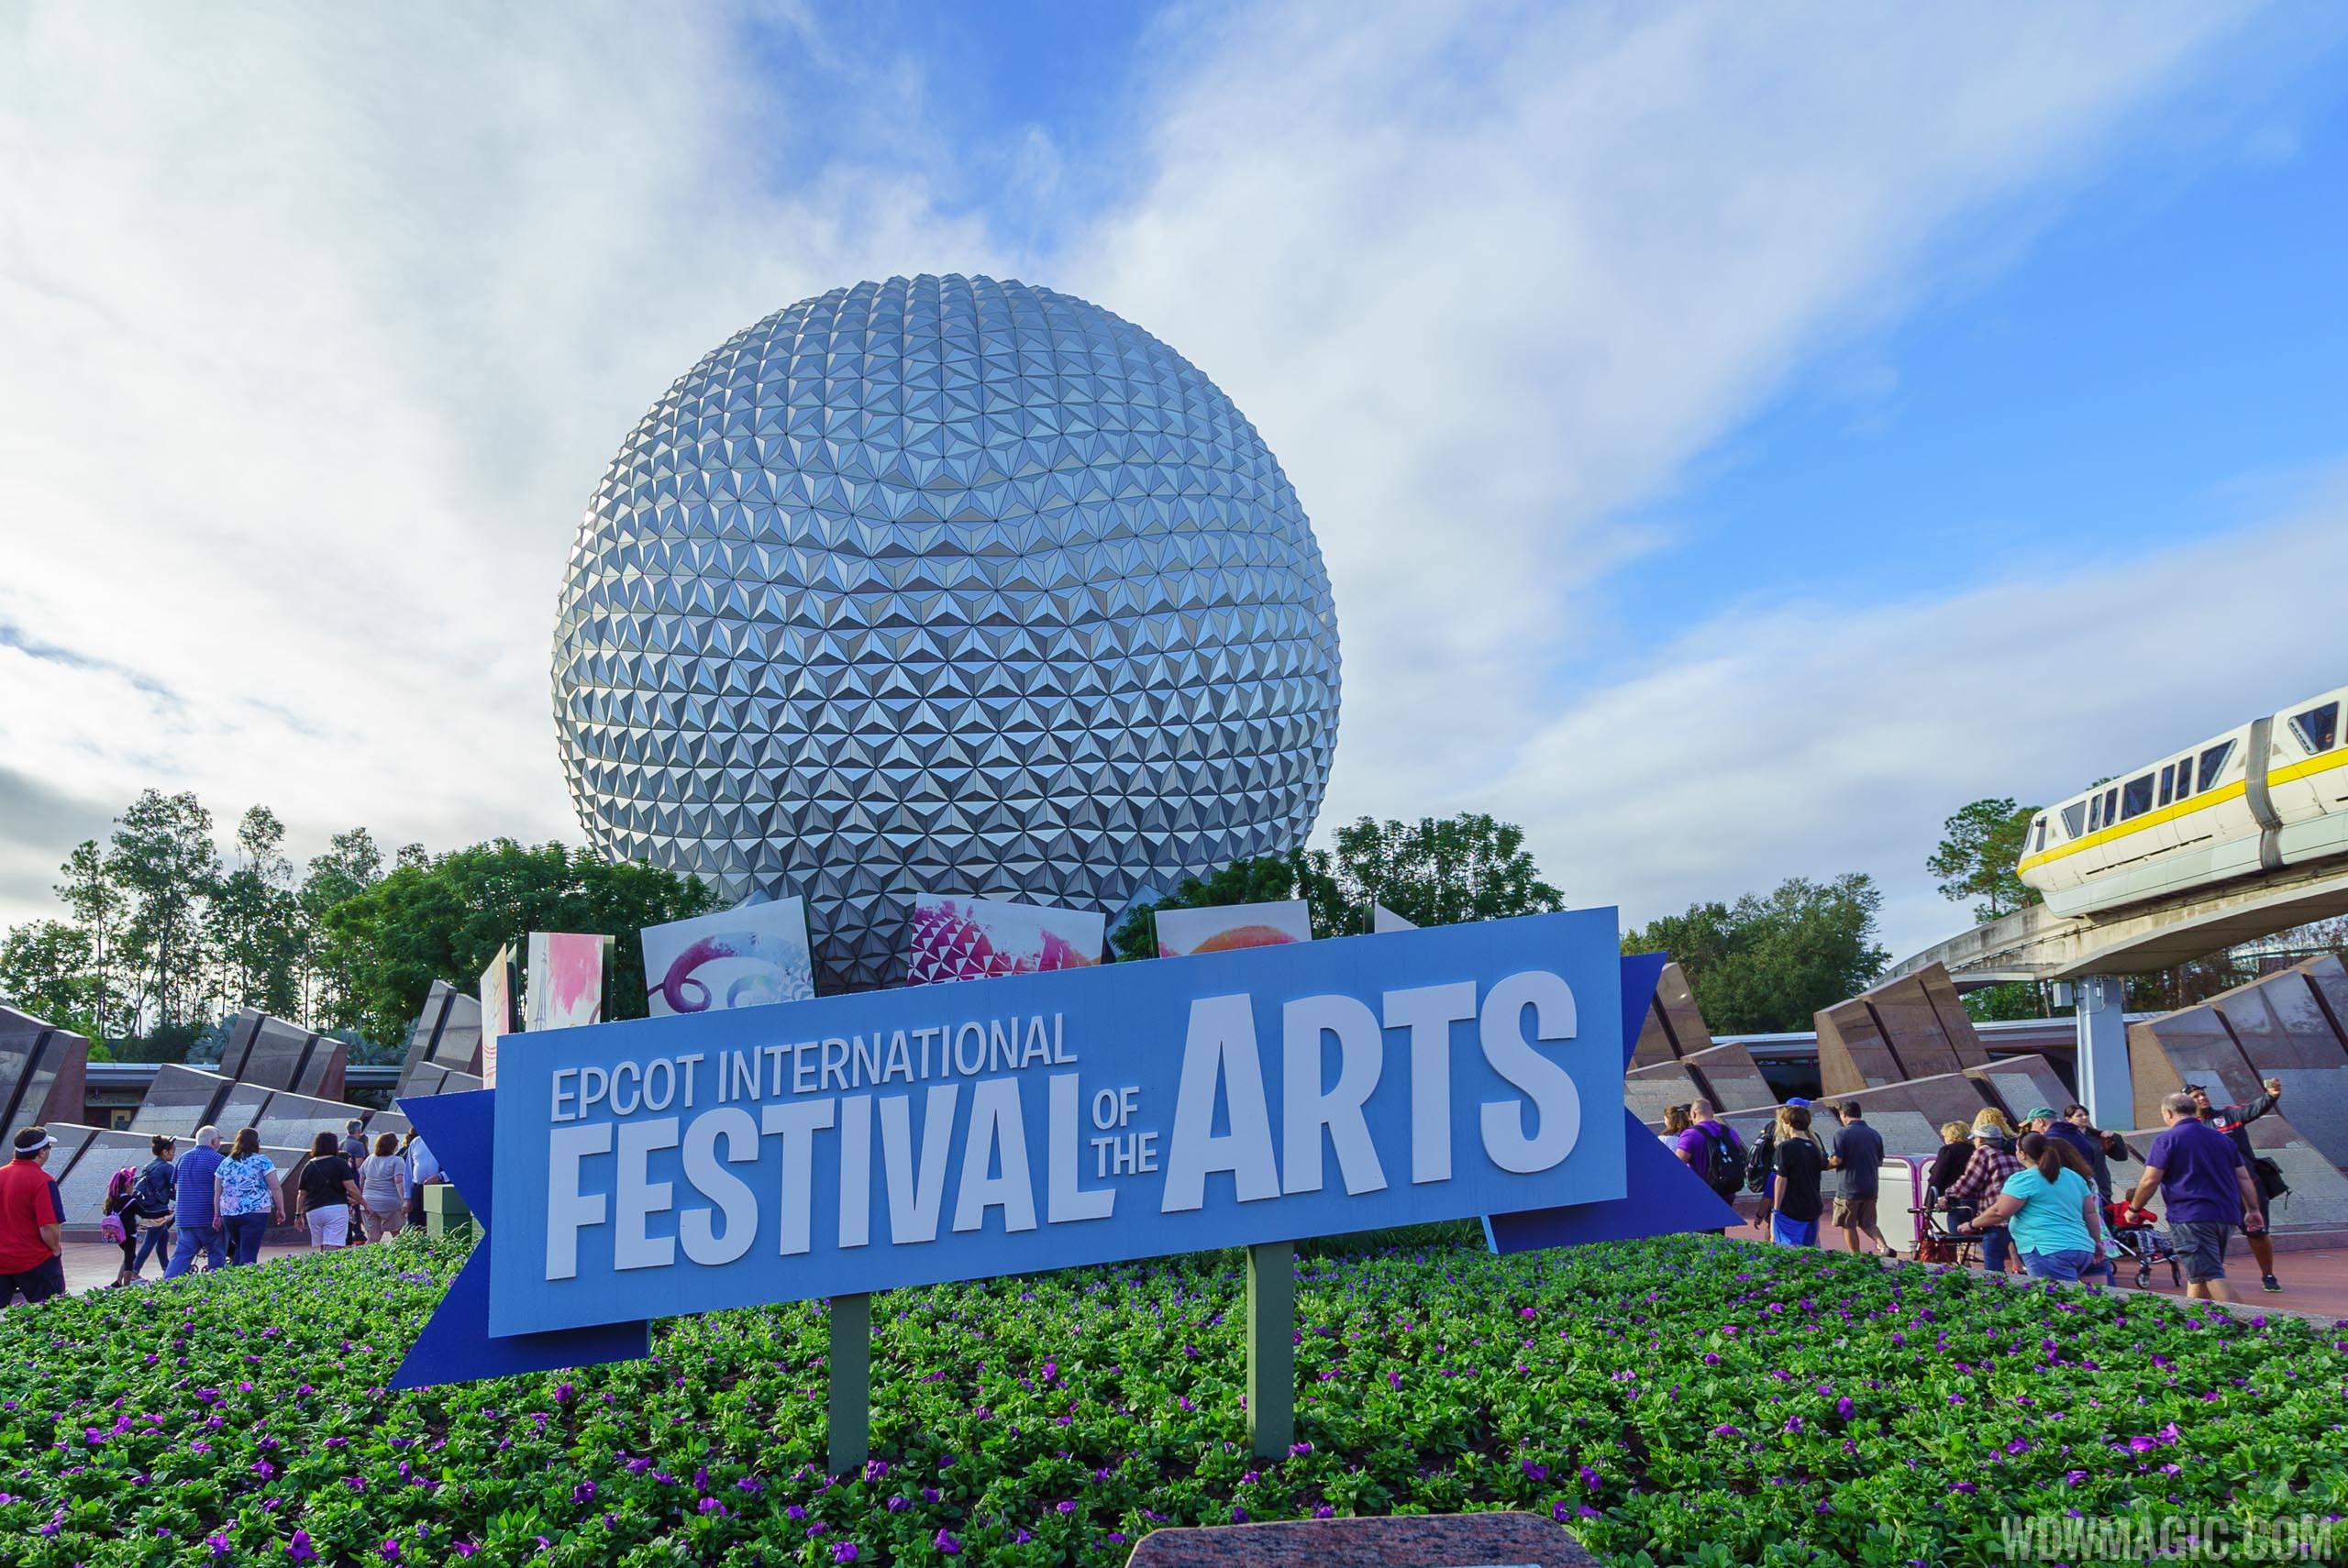 More details announced for the 2021 Taste of EPCOT International Festival of the Arts